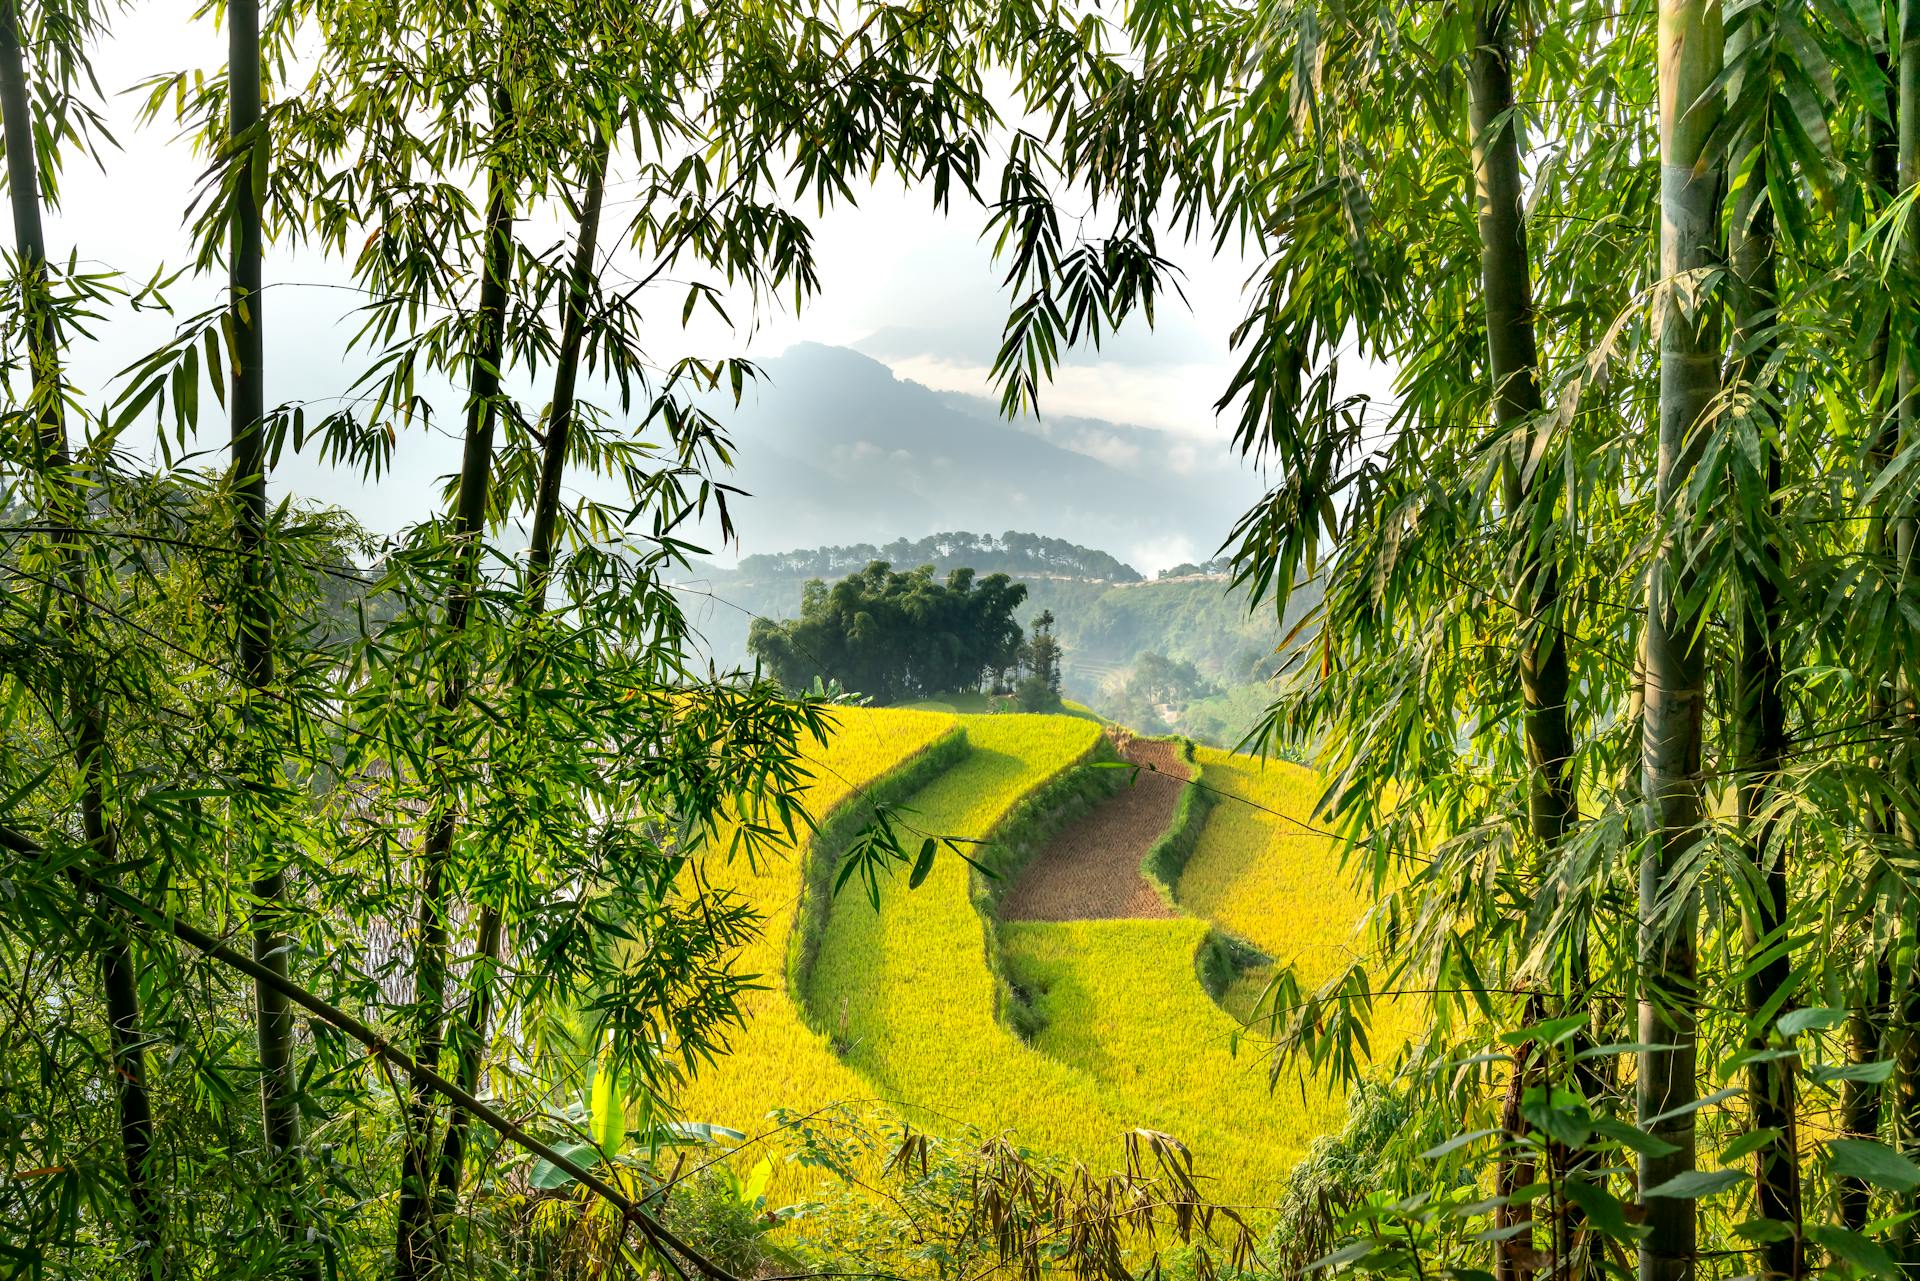 Scenic agricultural rice fields on hill slope